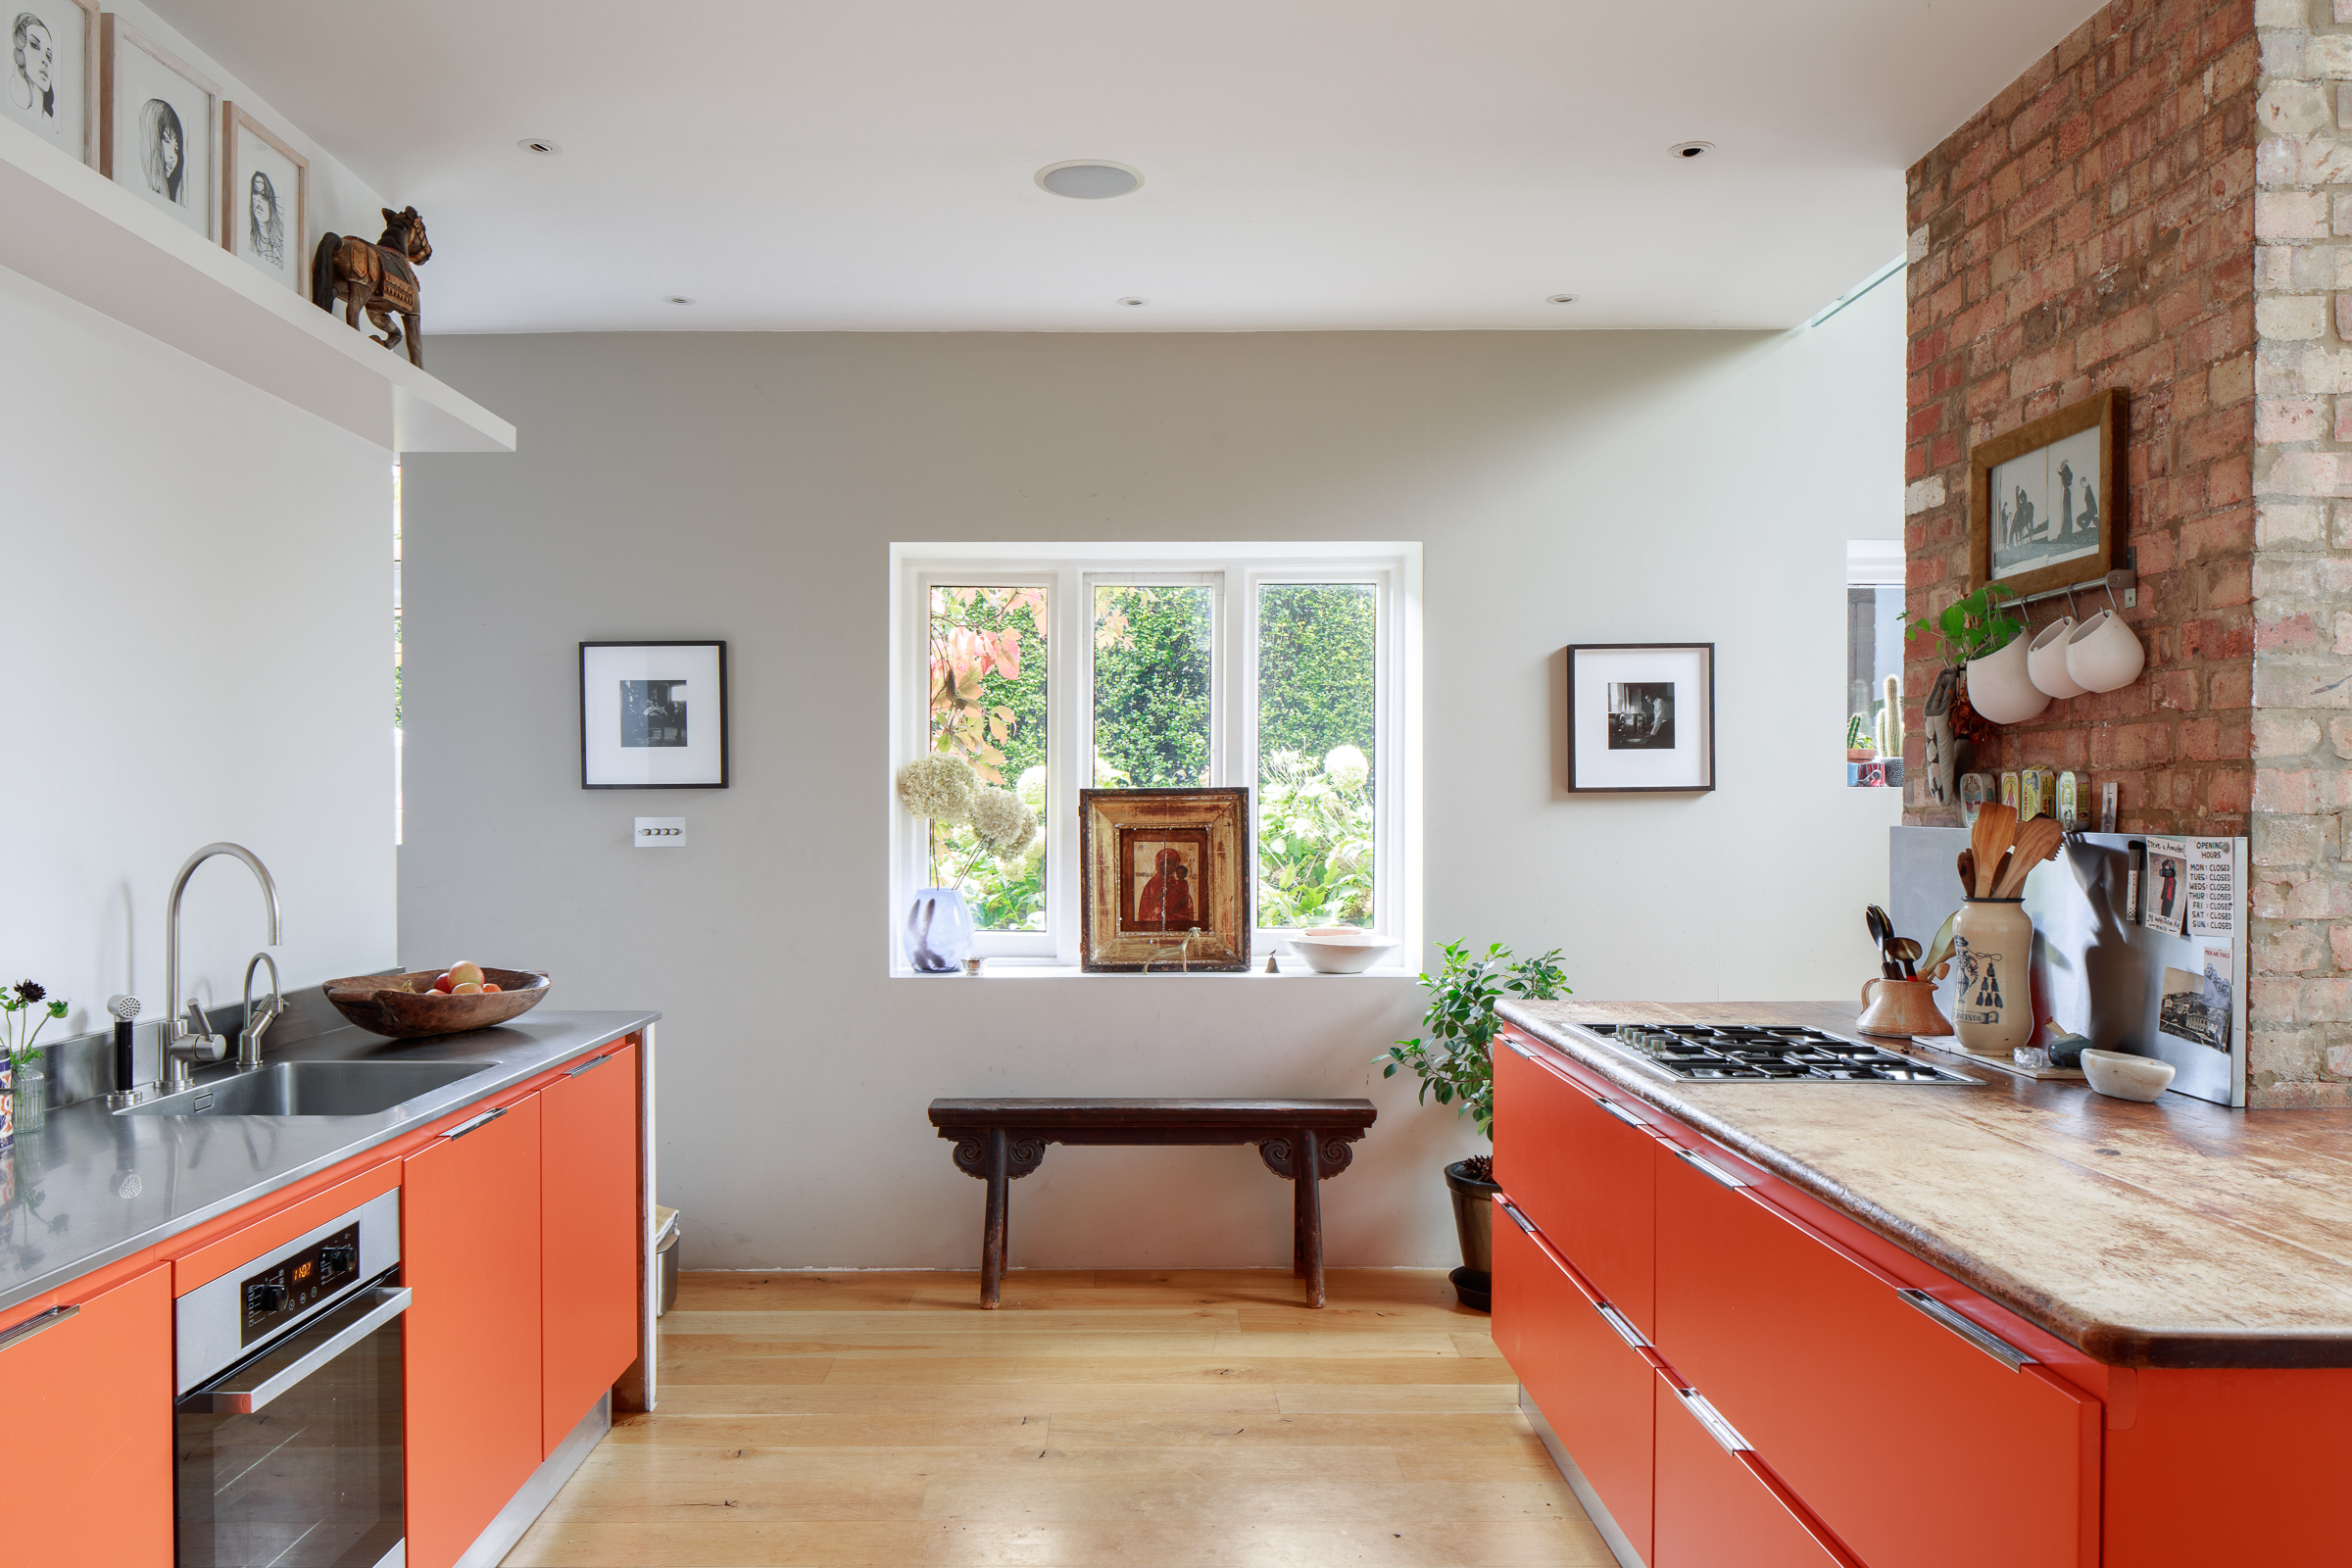 Wrentham Avenue NW10 to rent, contemporary kitchen with orange cabinets